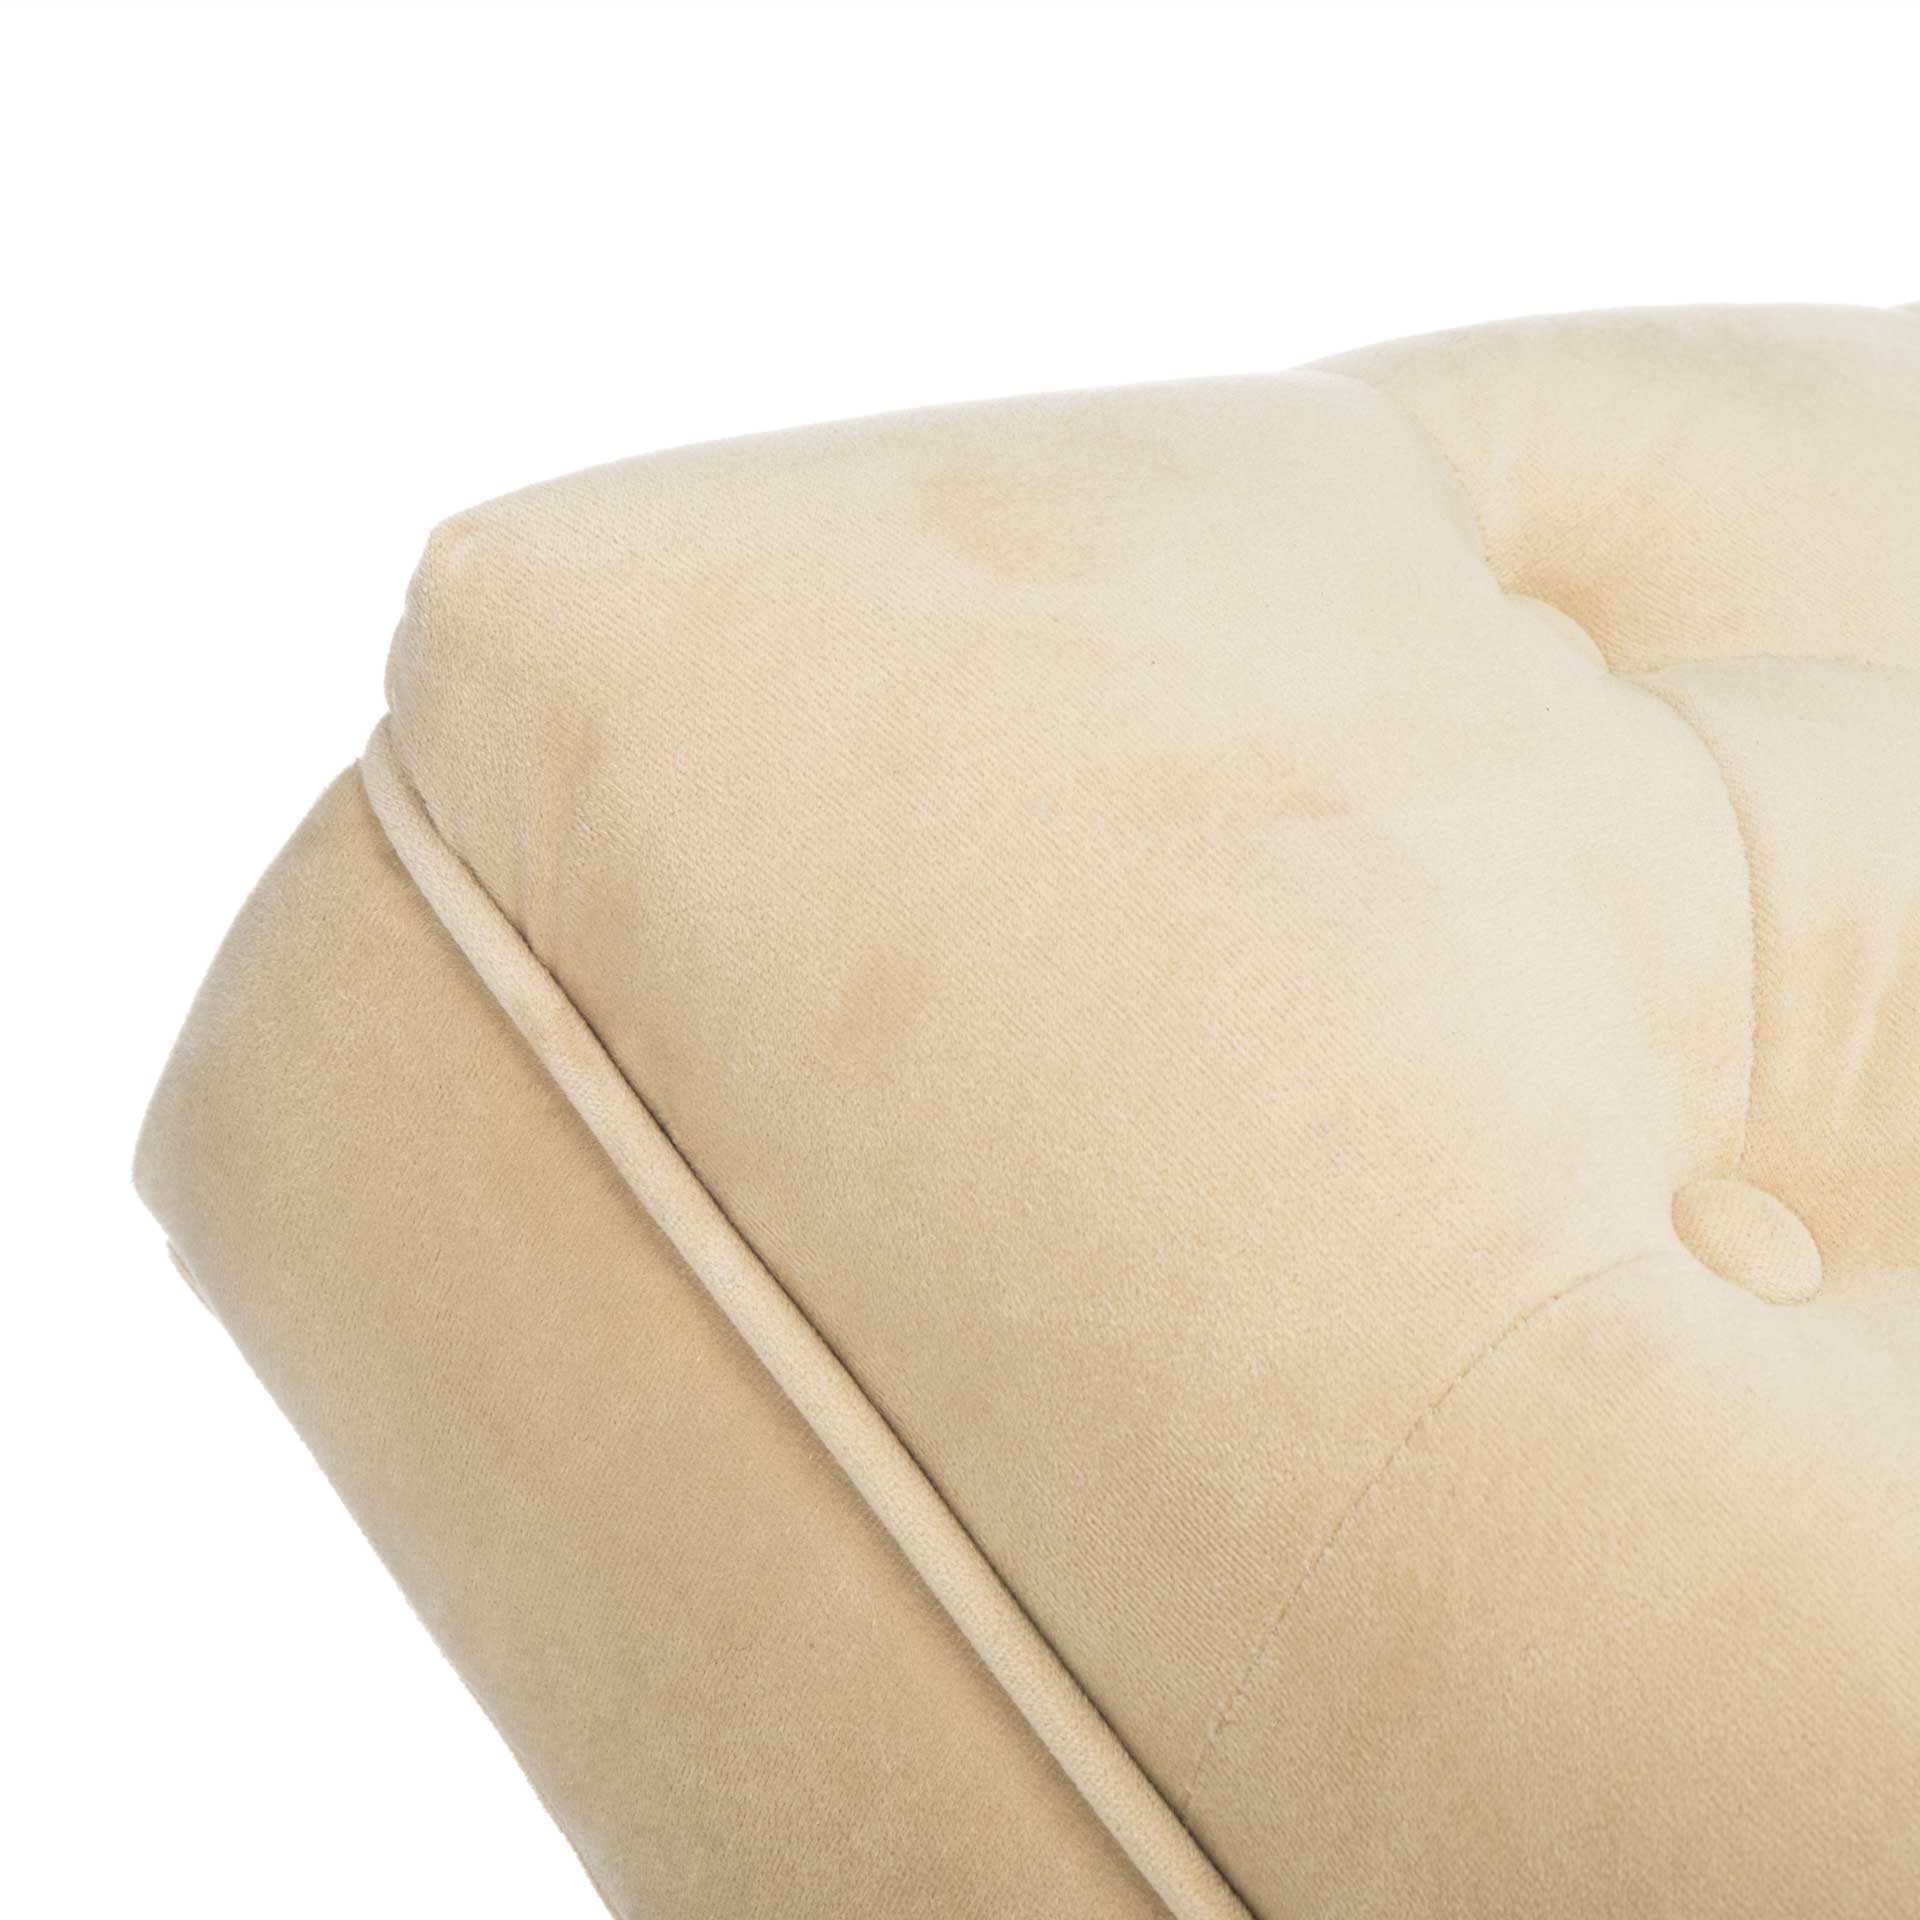 Morph Chaise With Headrest Pillow Beige